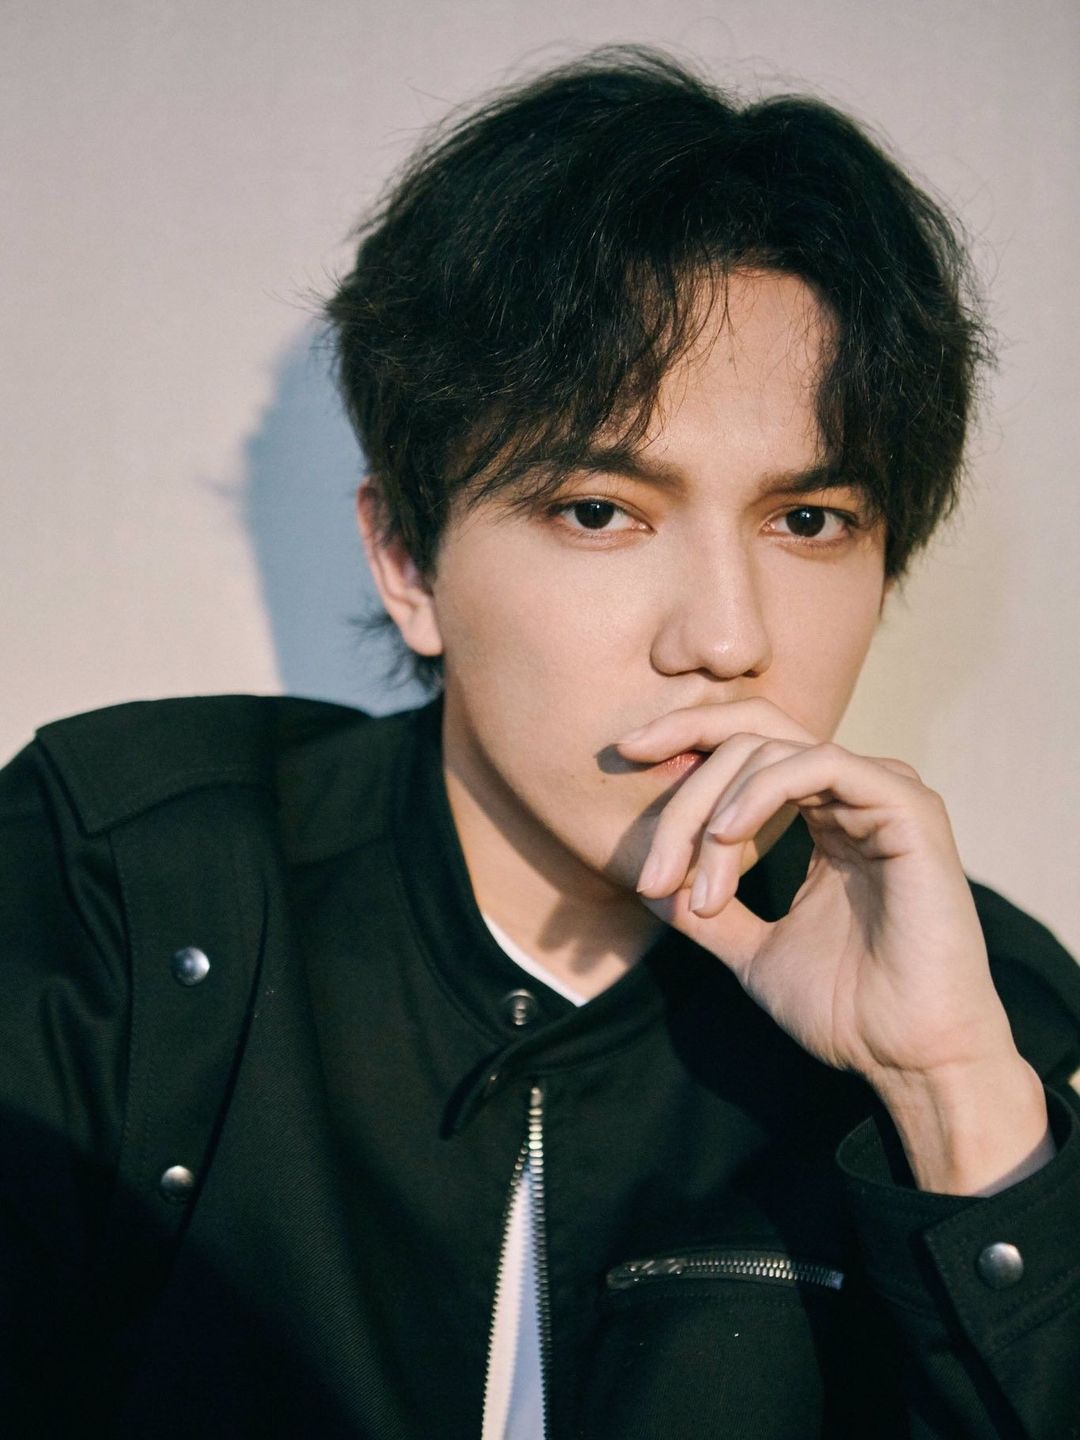 Dimash Kudaibergen does he have a wife